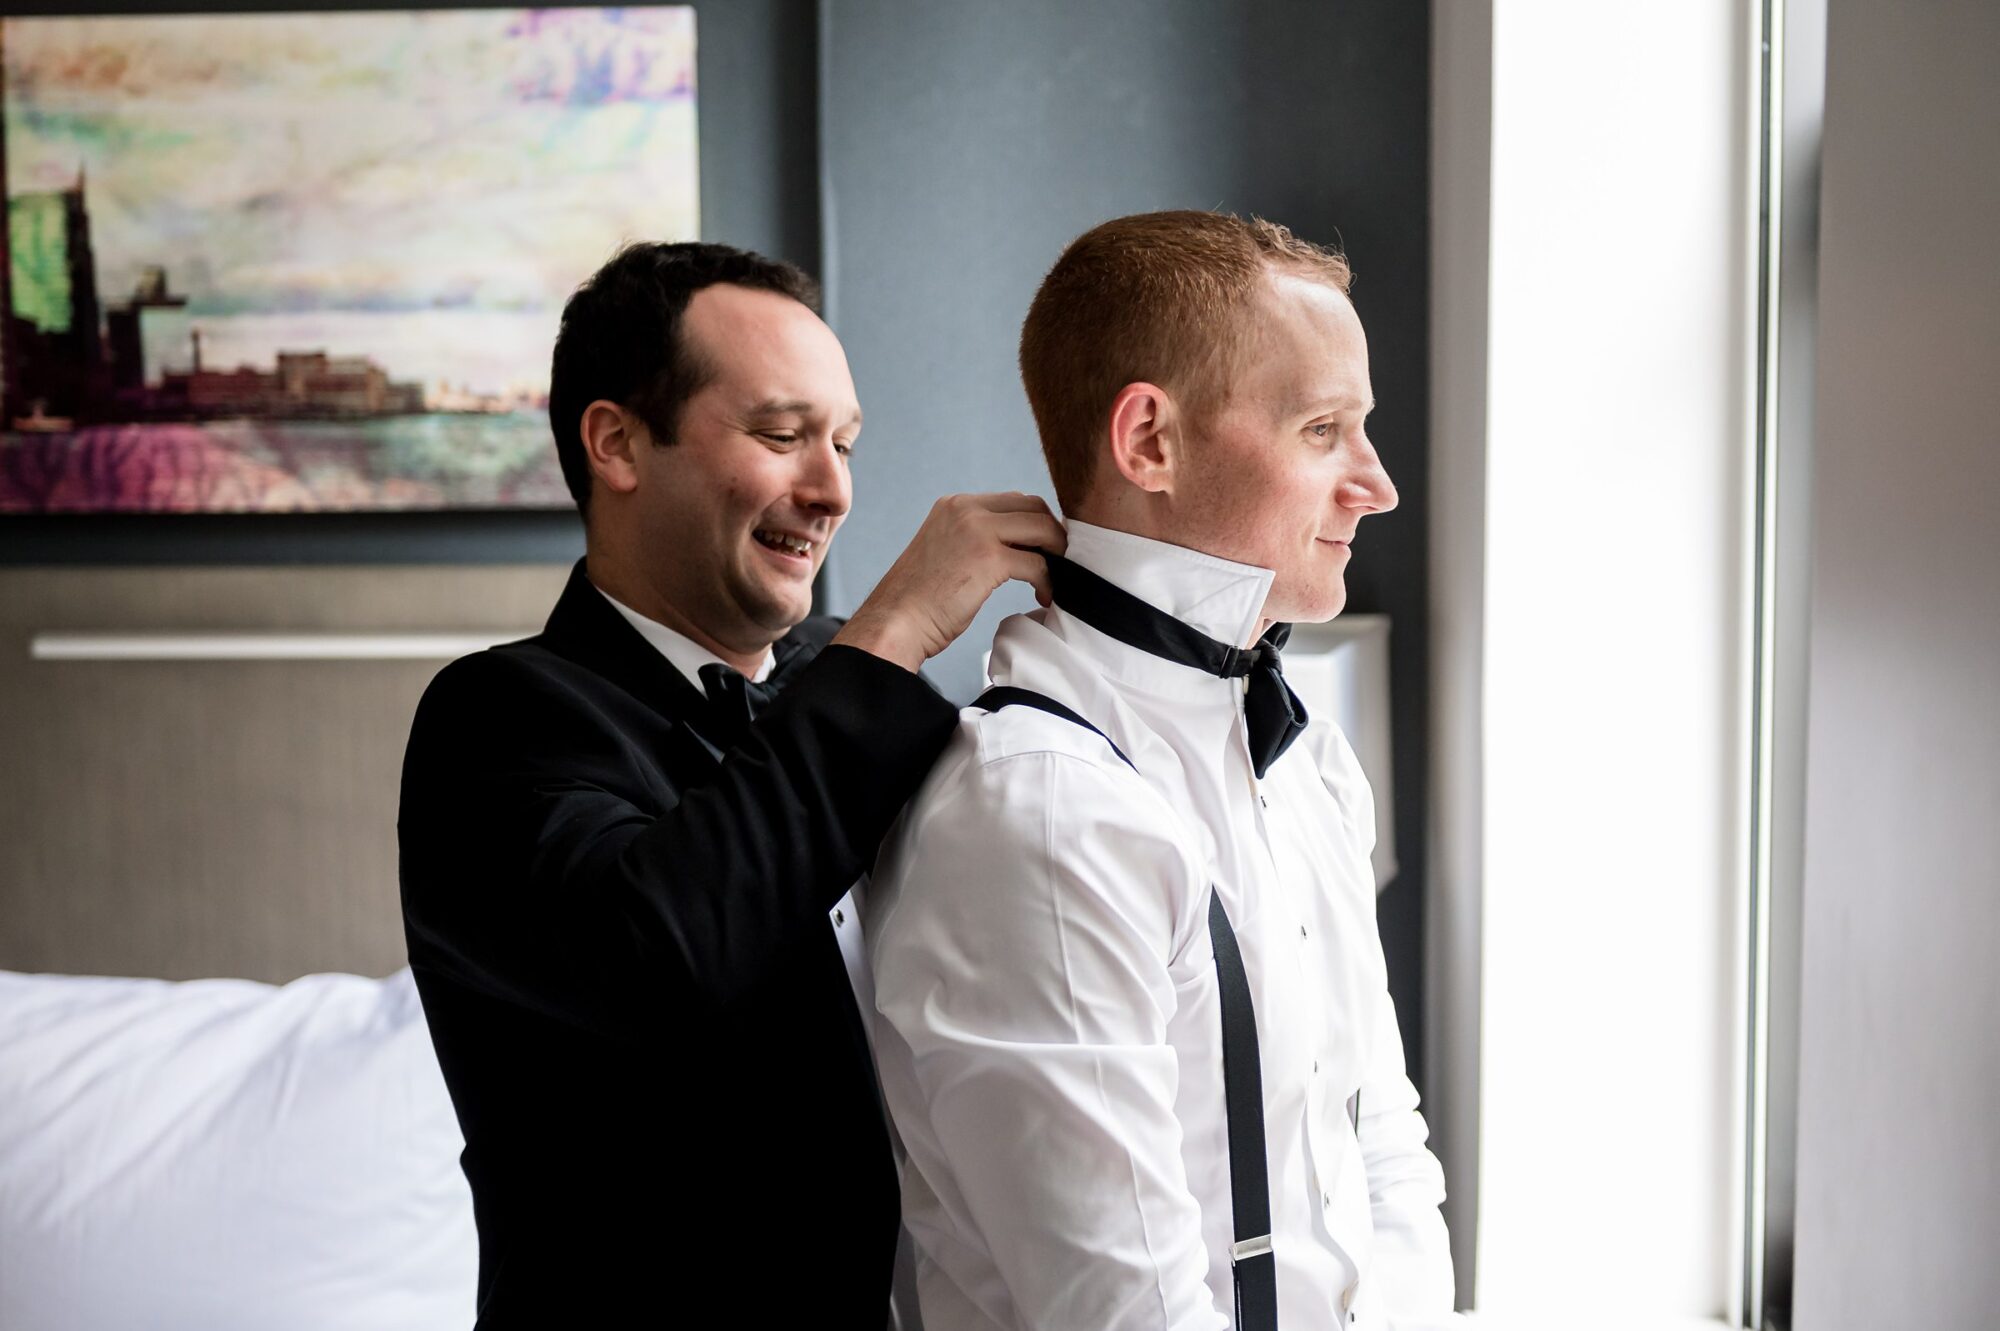 A man putting on a tuxedo in a hotel room.